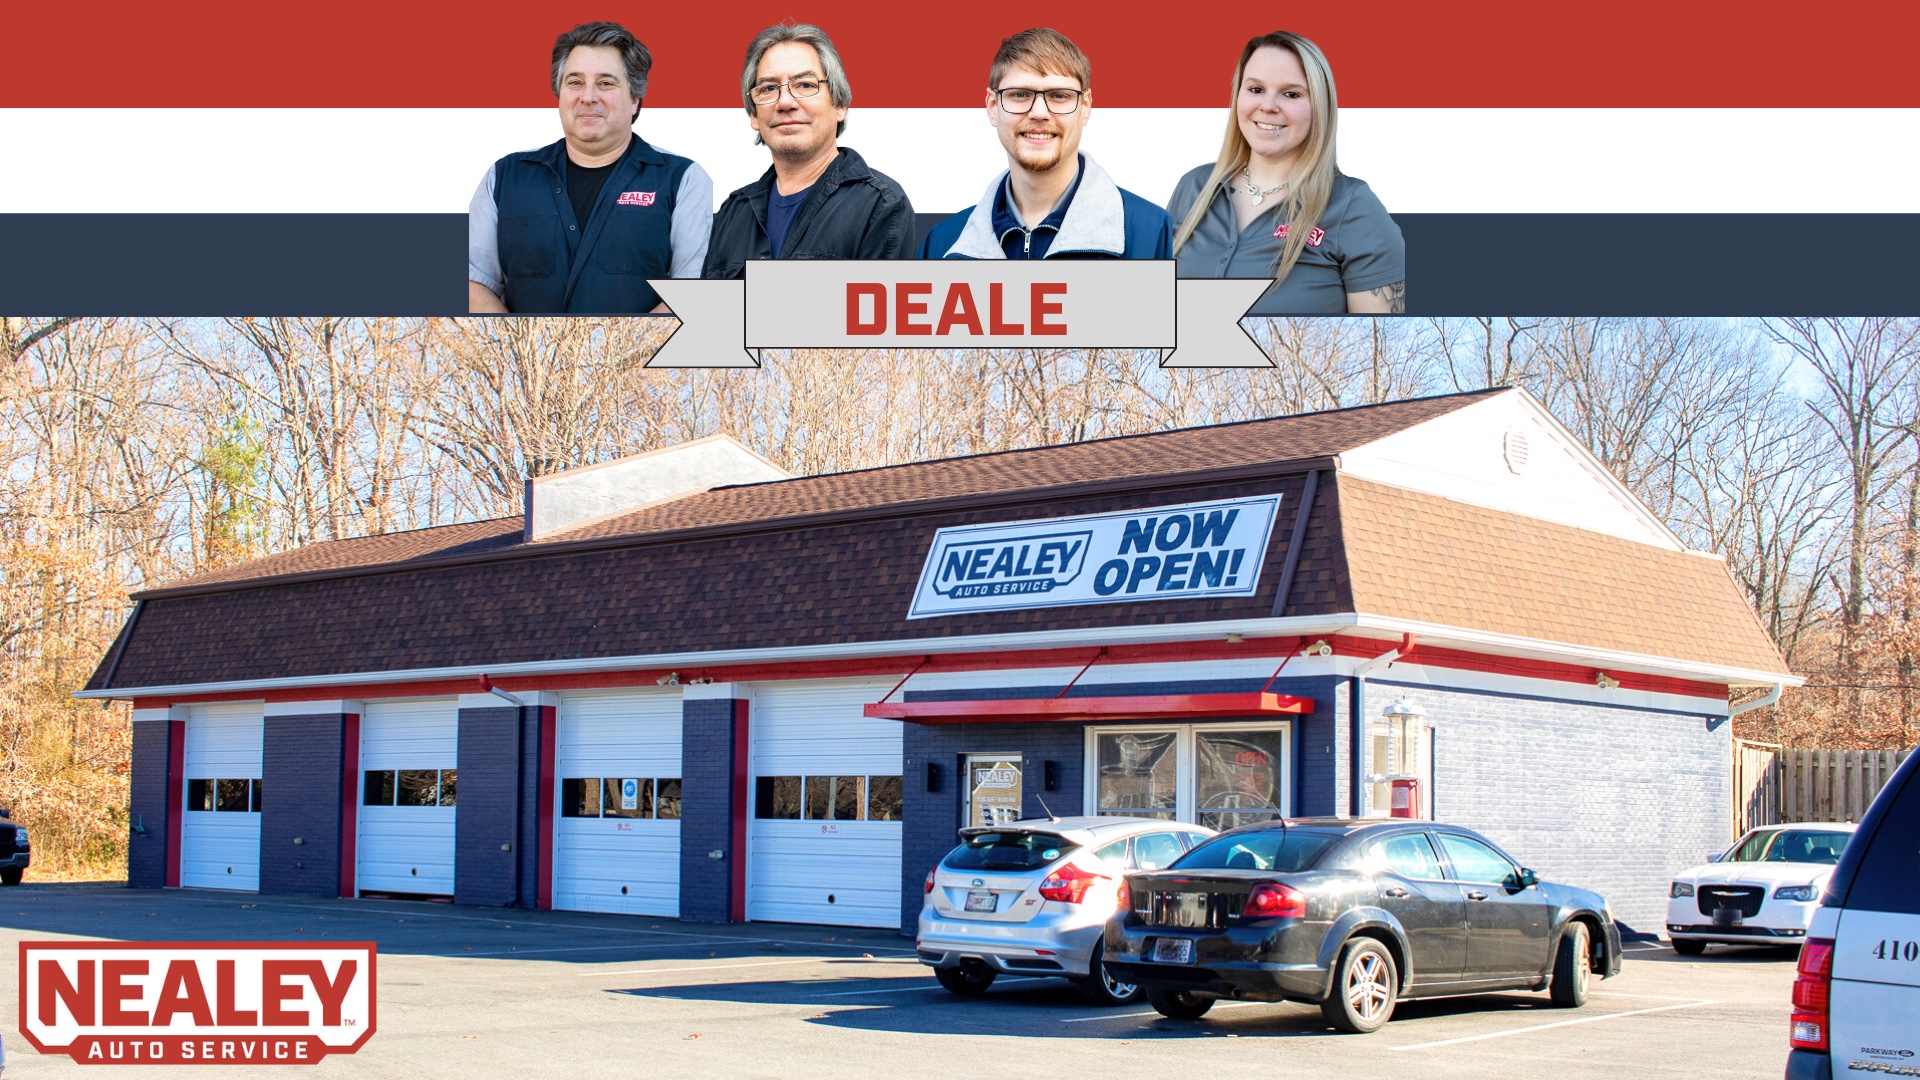 Our Team - Nealey Auto Service - Deale